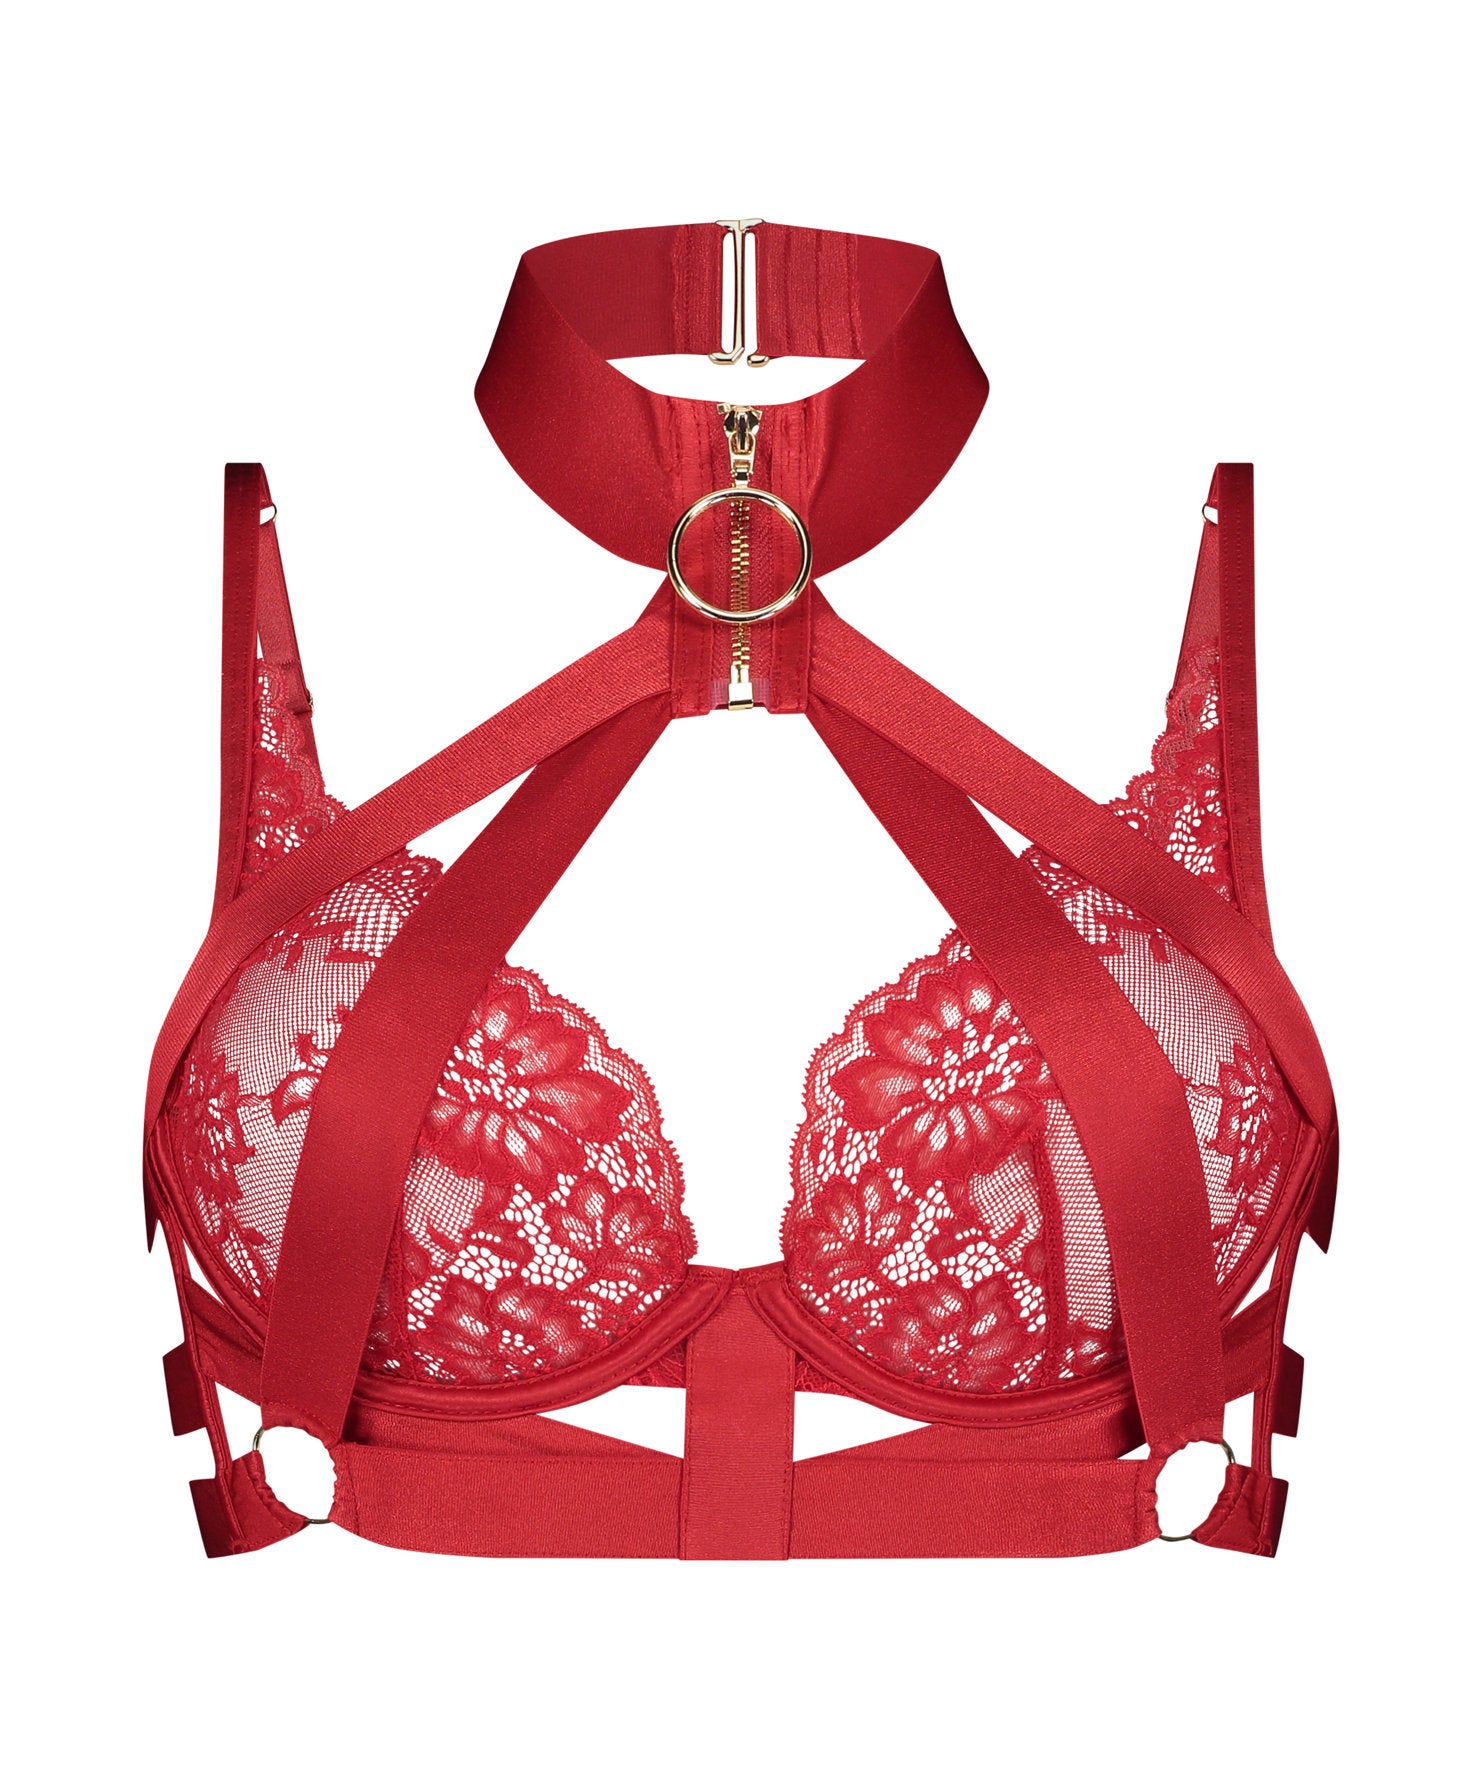 Clementine Up Bra In Different Cup Sizes_204480_Tango Red_01